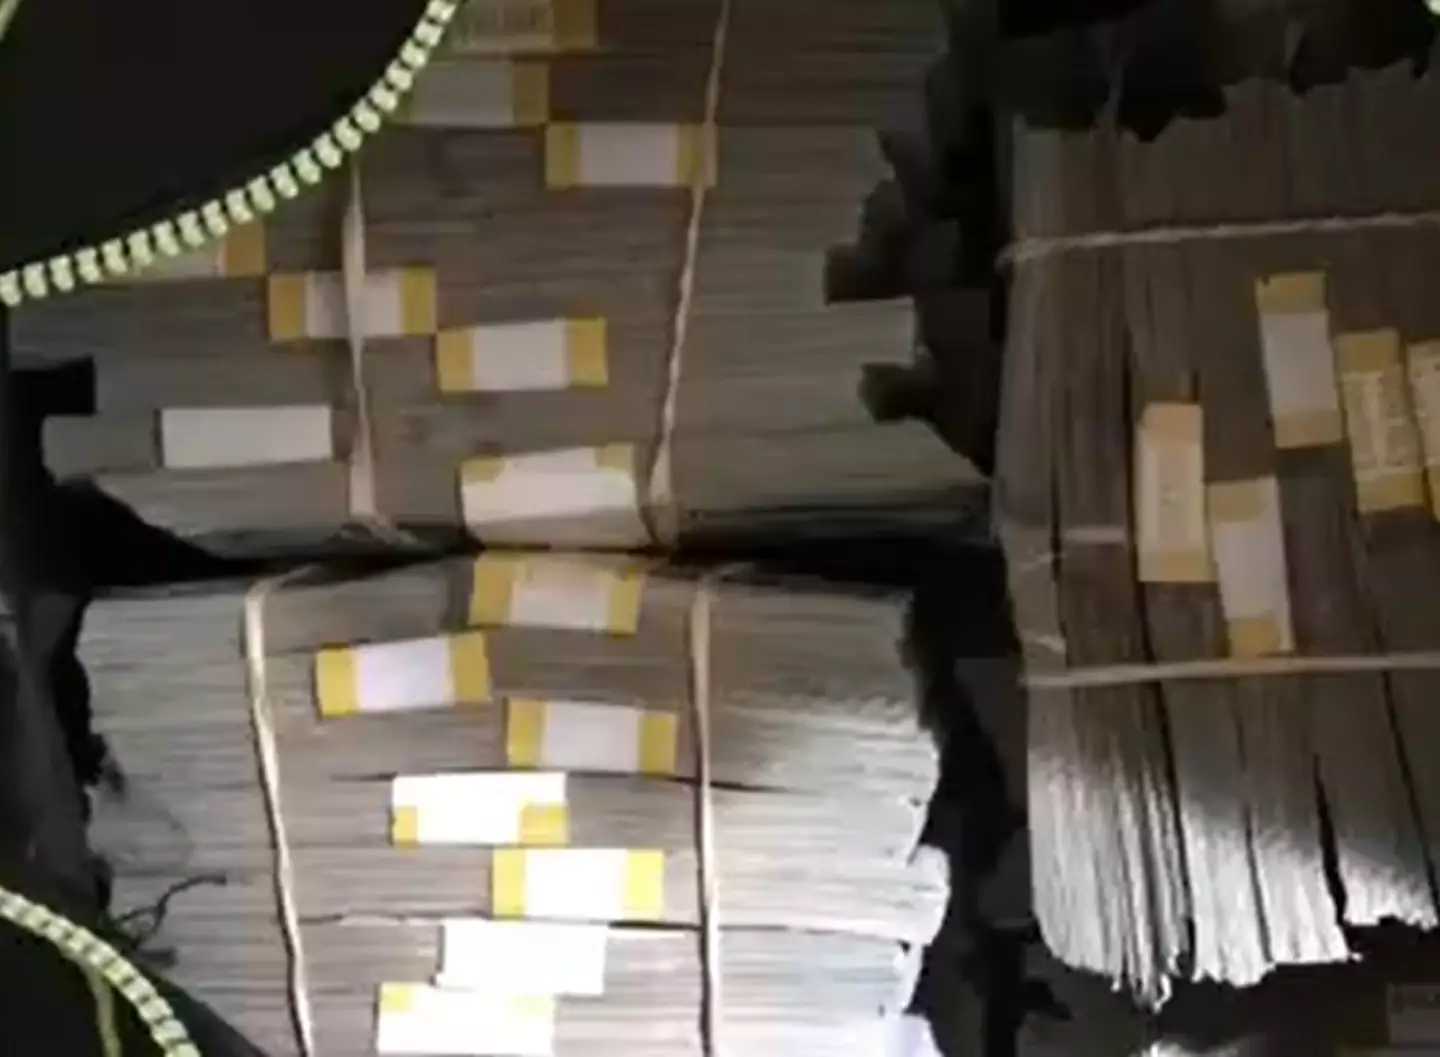 Inside the unit was a safe, and inside the safe was $7.5 million in cash.